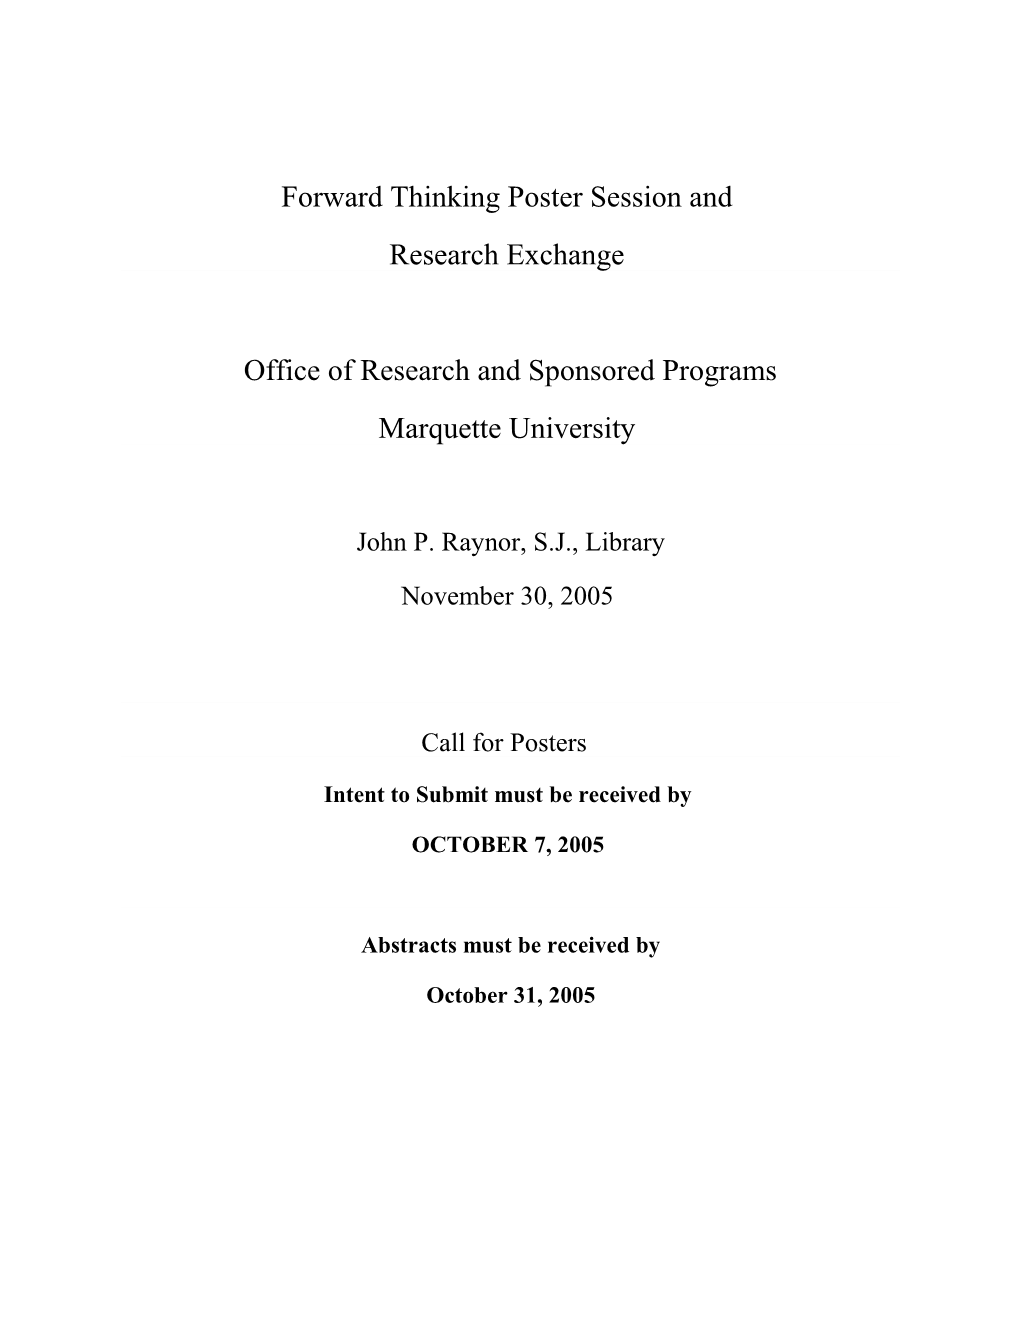 The Office of Research and Sponsored Programs Invites You to Participate in a Forward Thinking